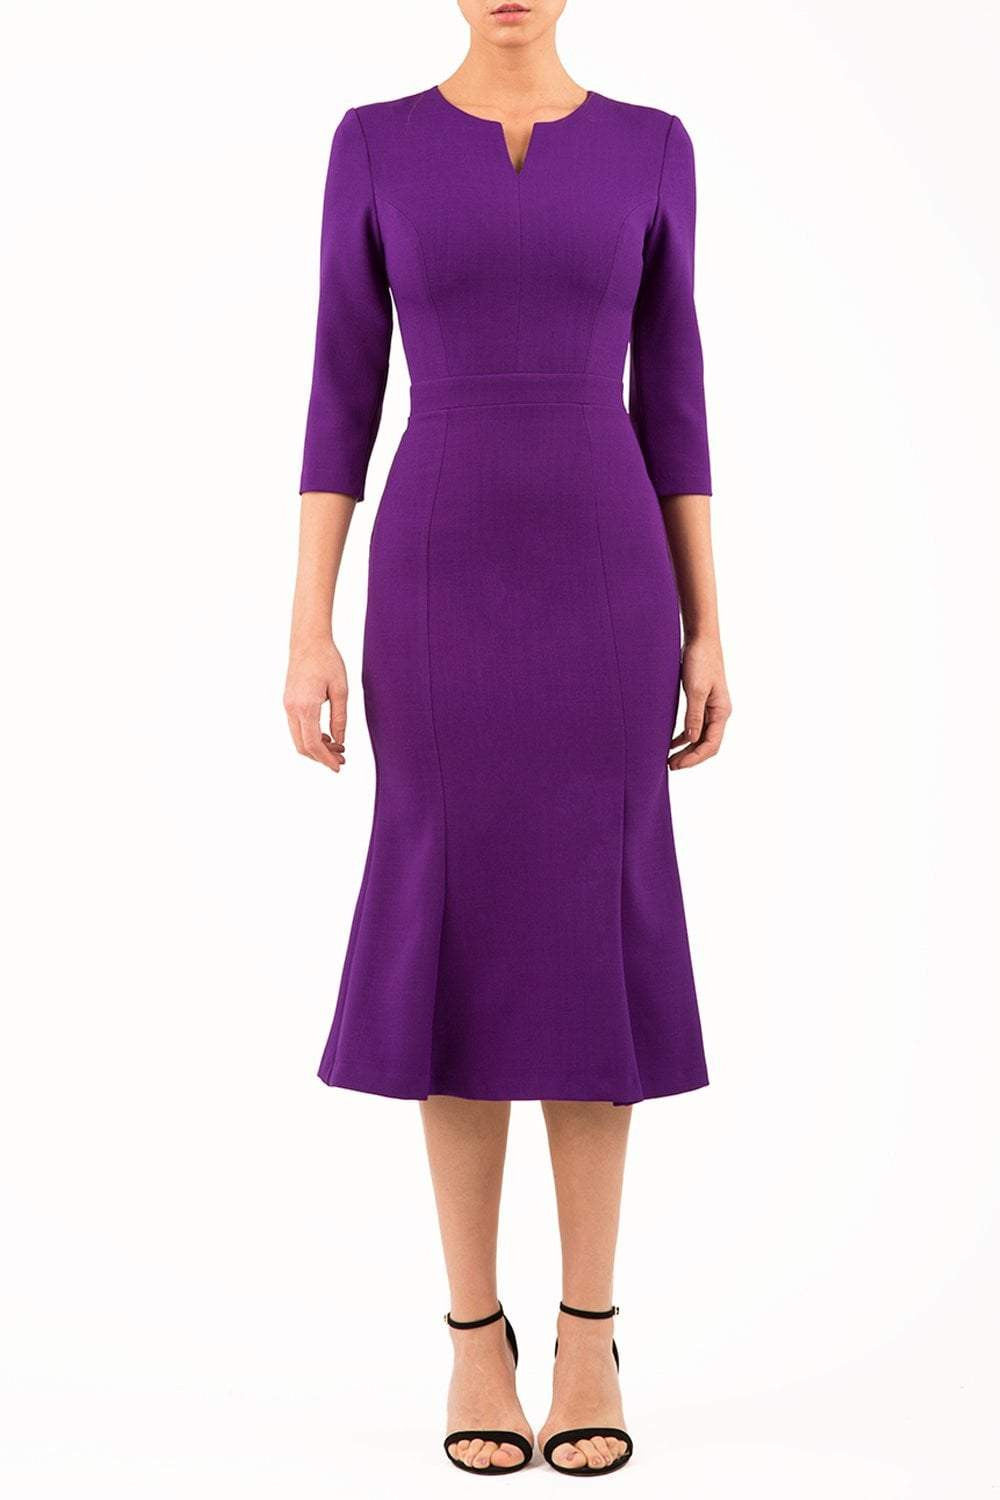 blonde model is wearing diva catwalk senne midaxi sleeved dress with fishtail and rounded neckline with a slit in the middle in purple front